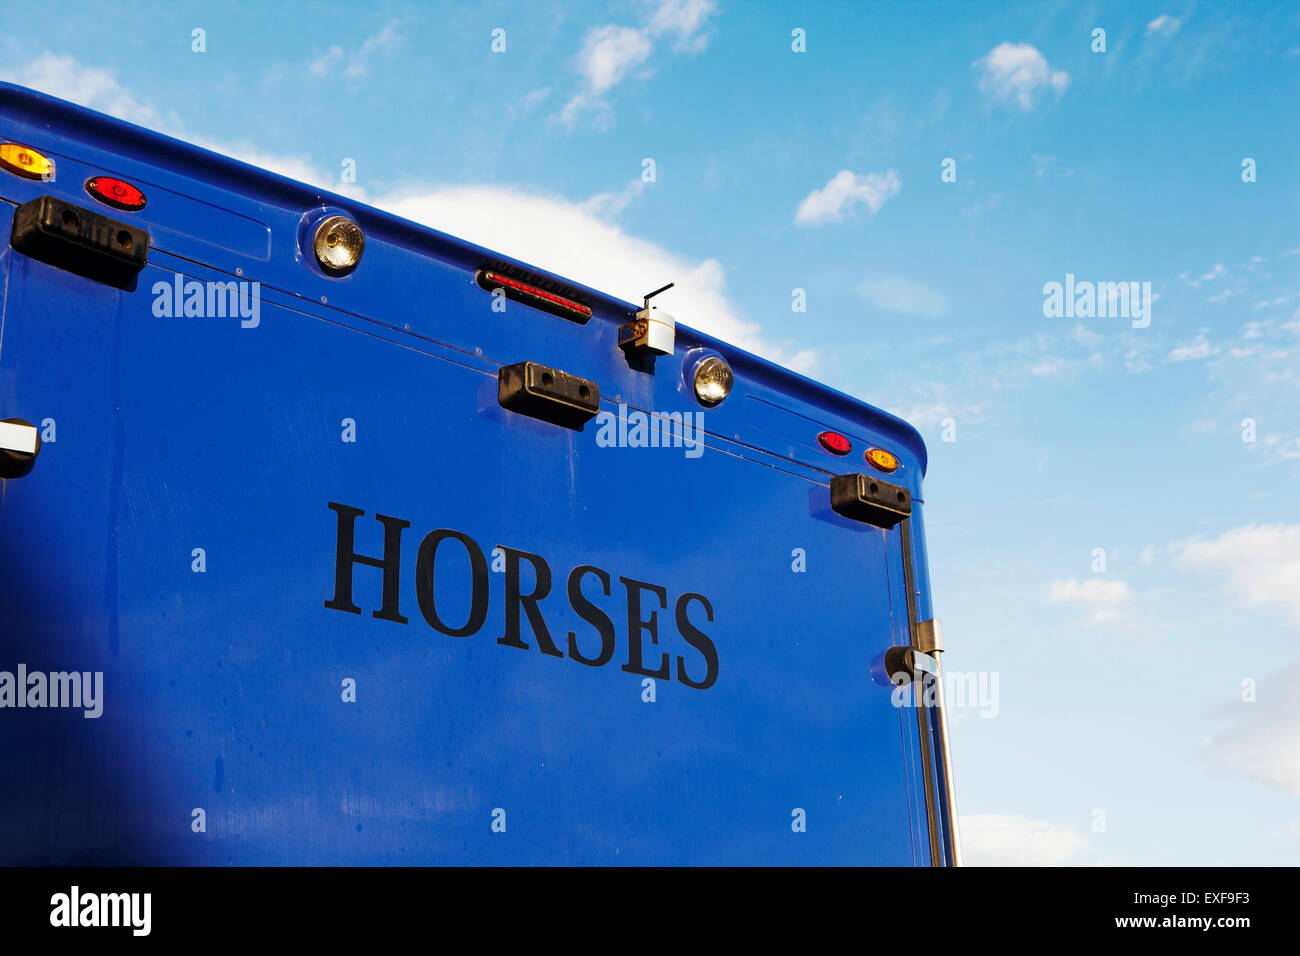 Horse carrier, horse racing Stock Photo